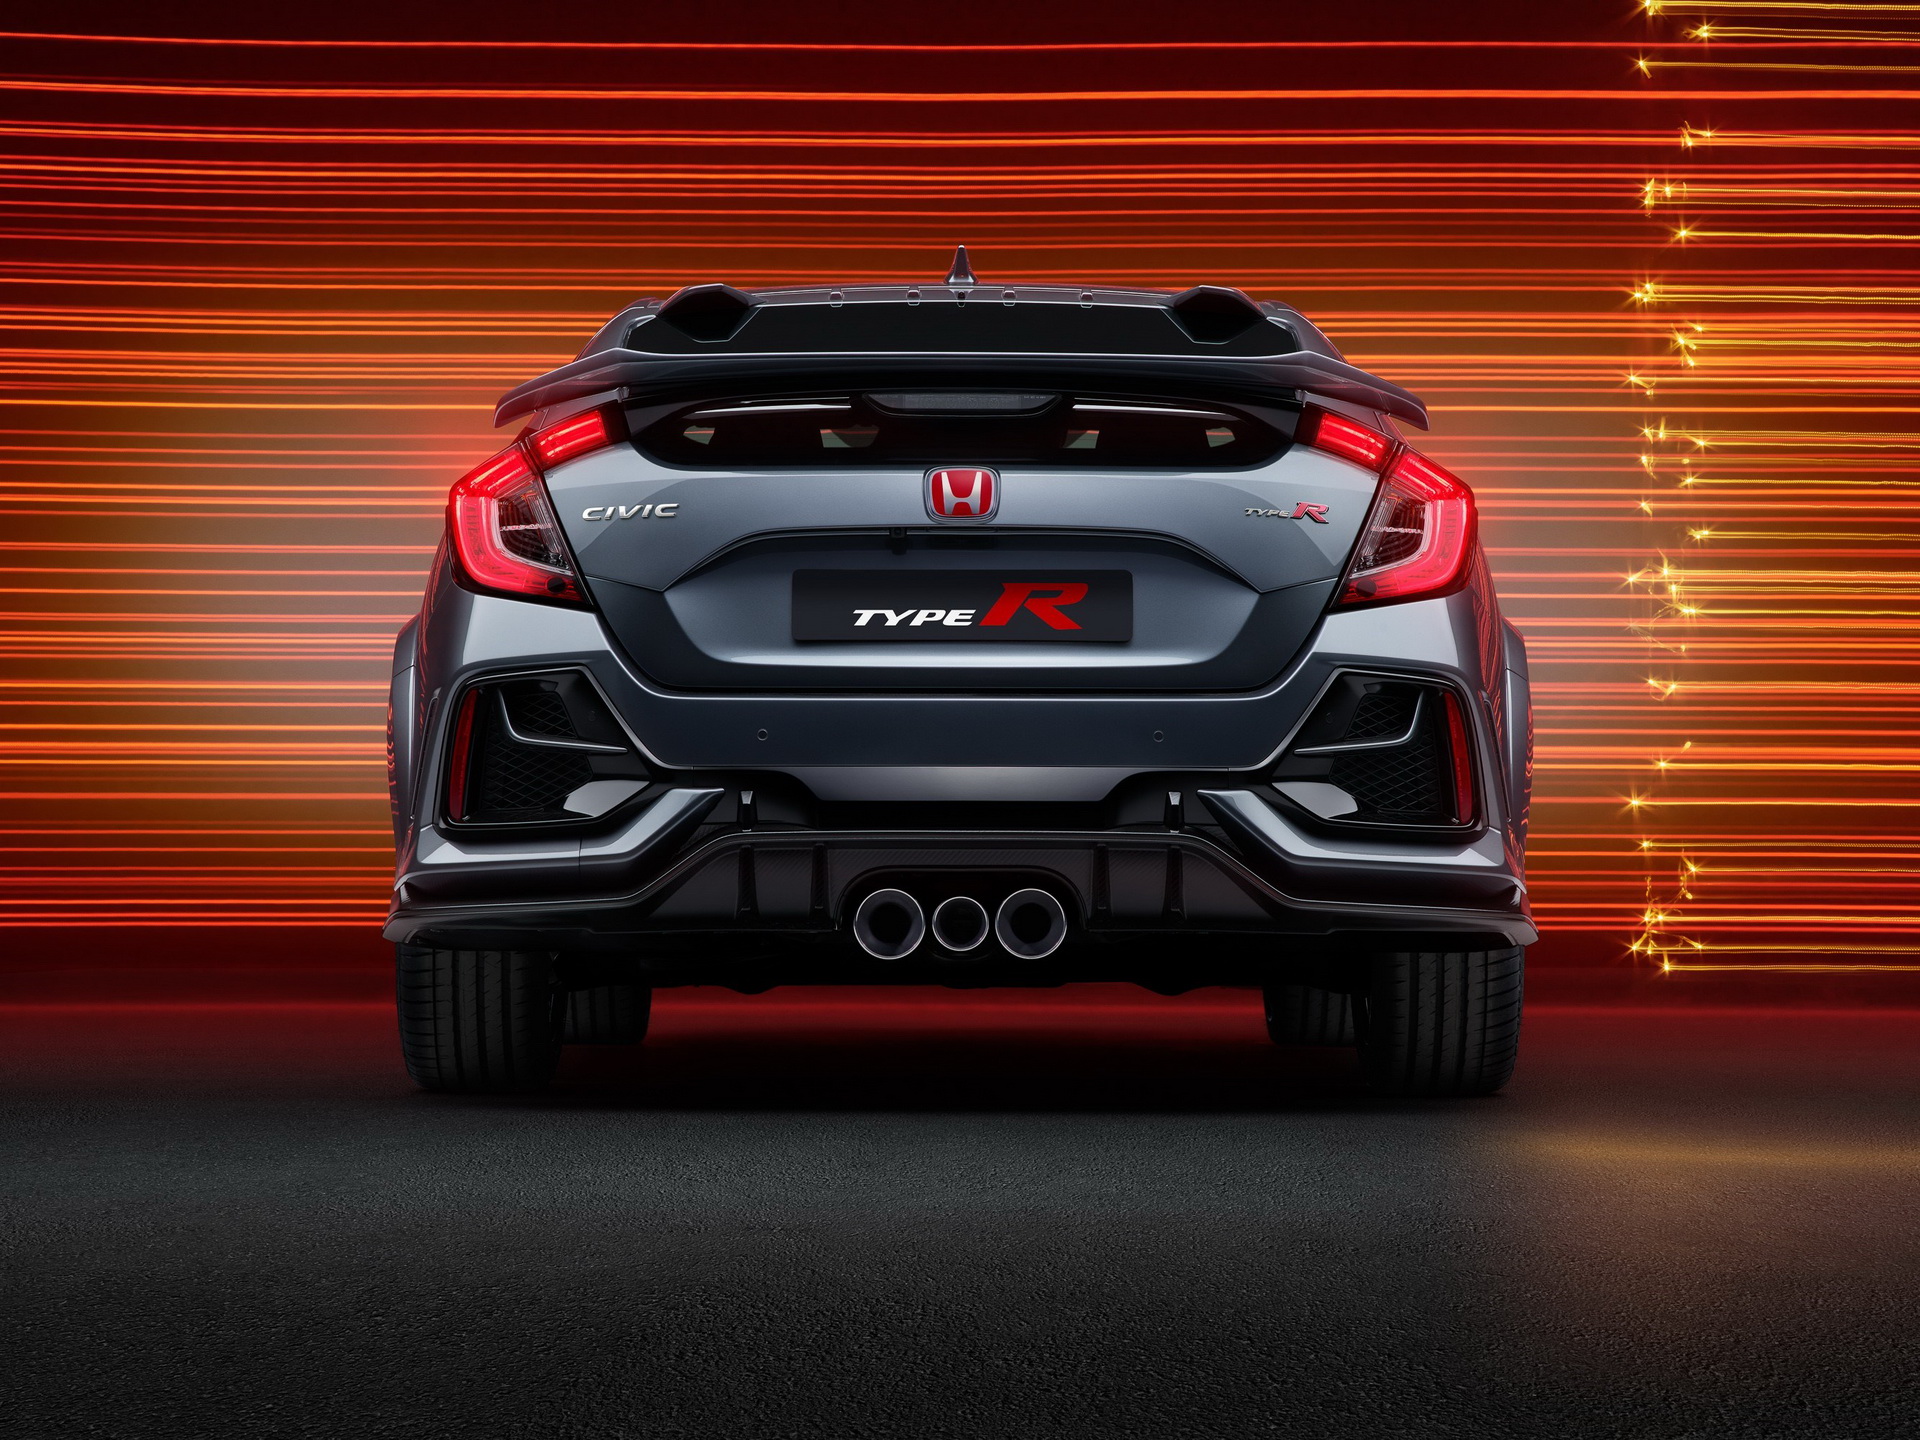 This Modified Honda Civic Into 'Type R' Keeps Us Drooling For More